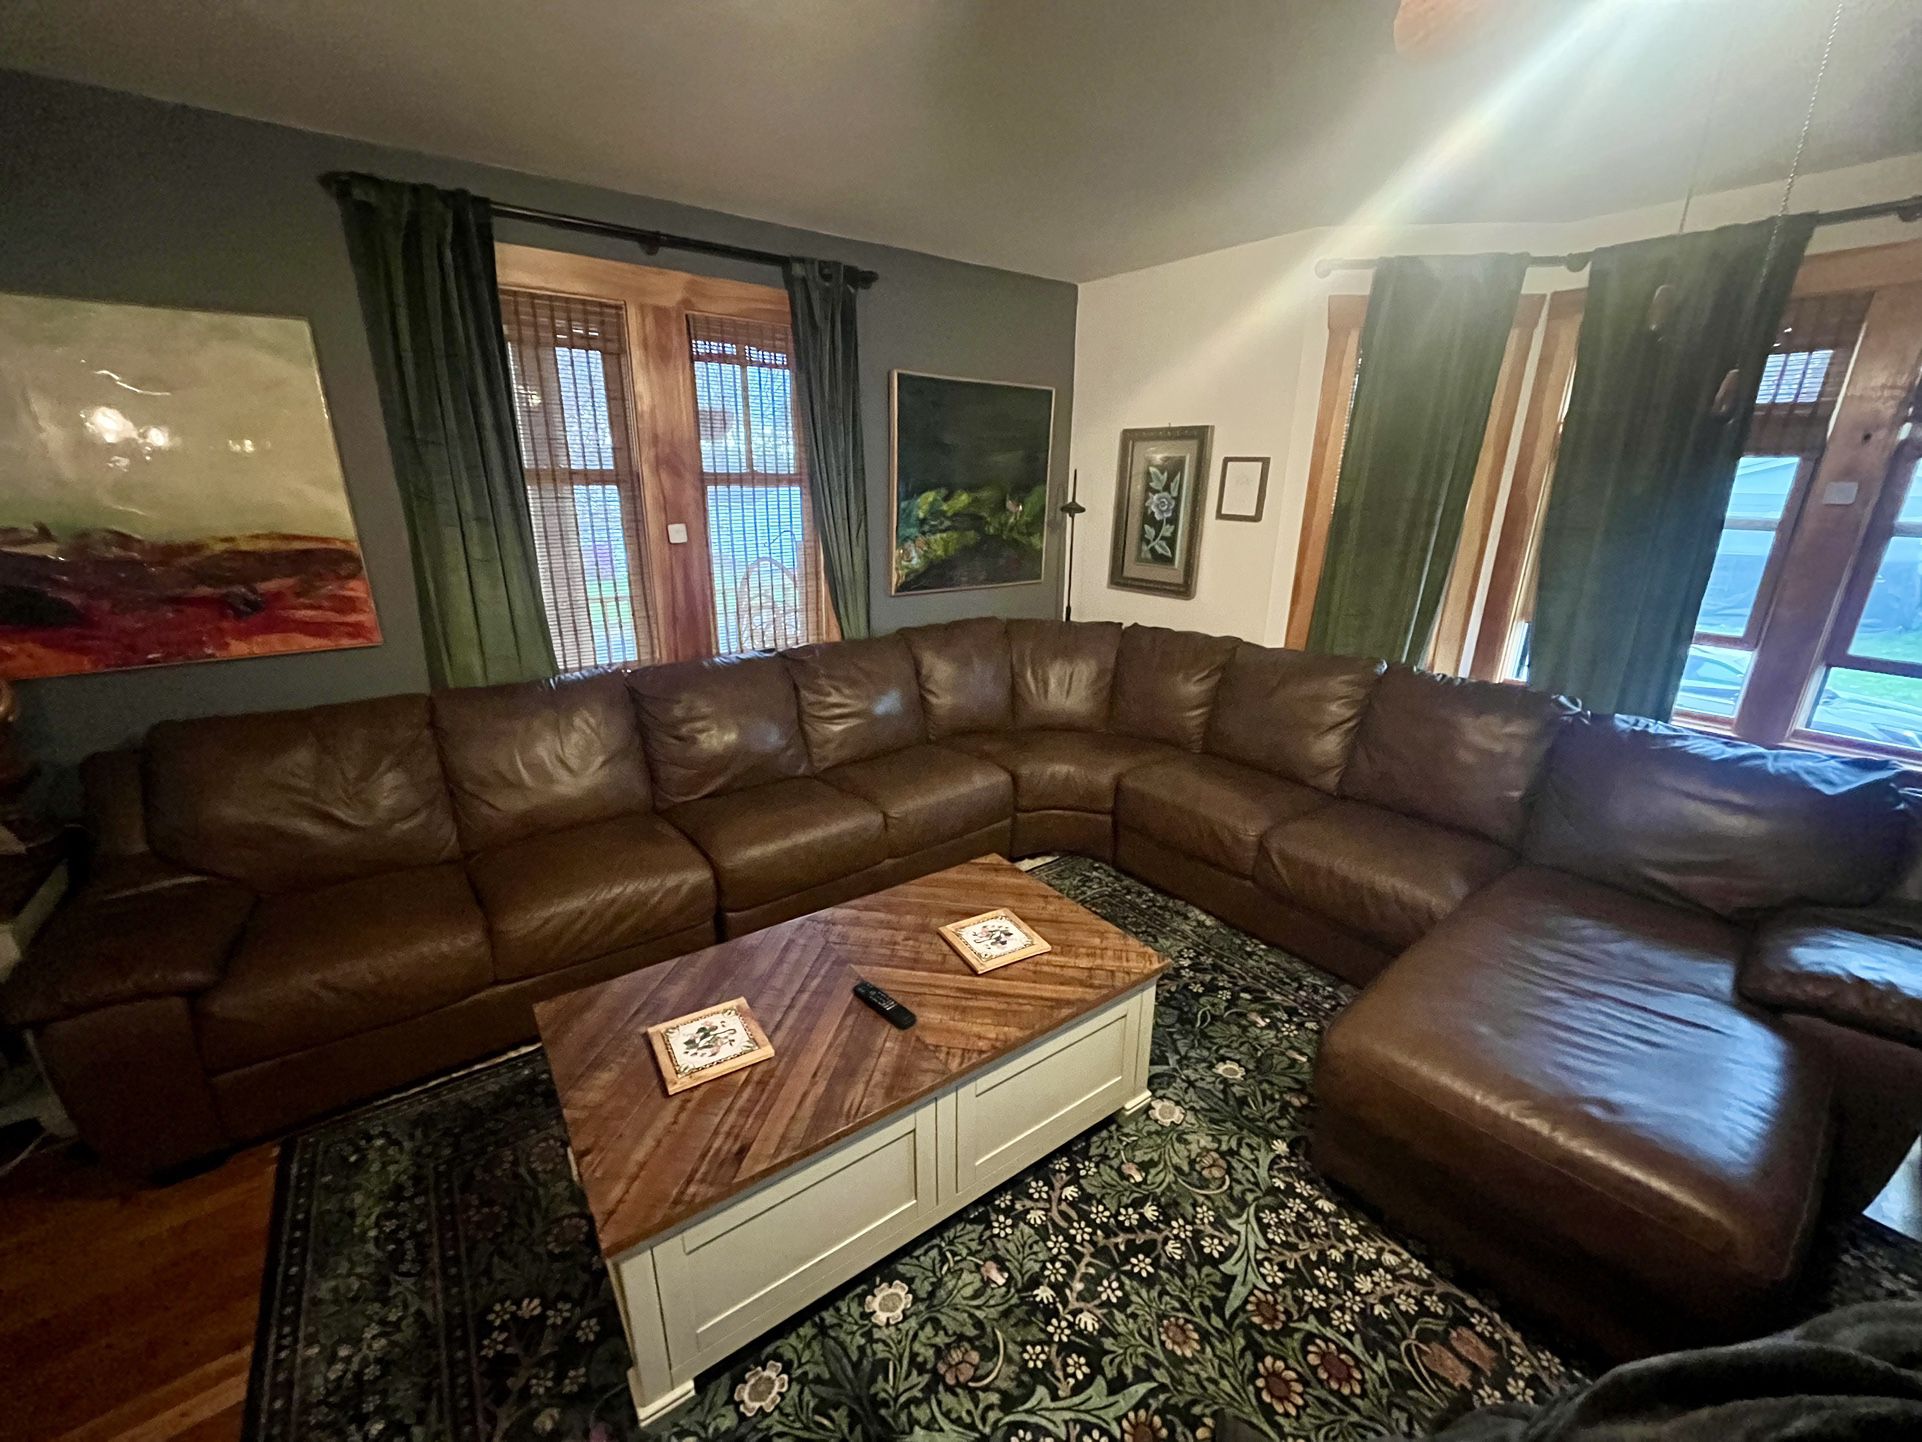 Large Italian Leather Sectional With Chaise For 1650 Or TRADE